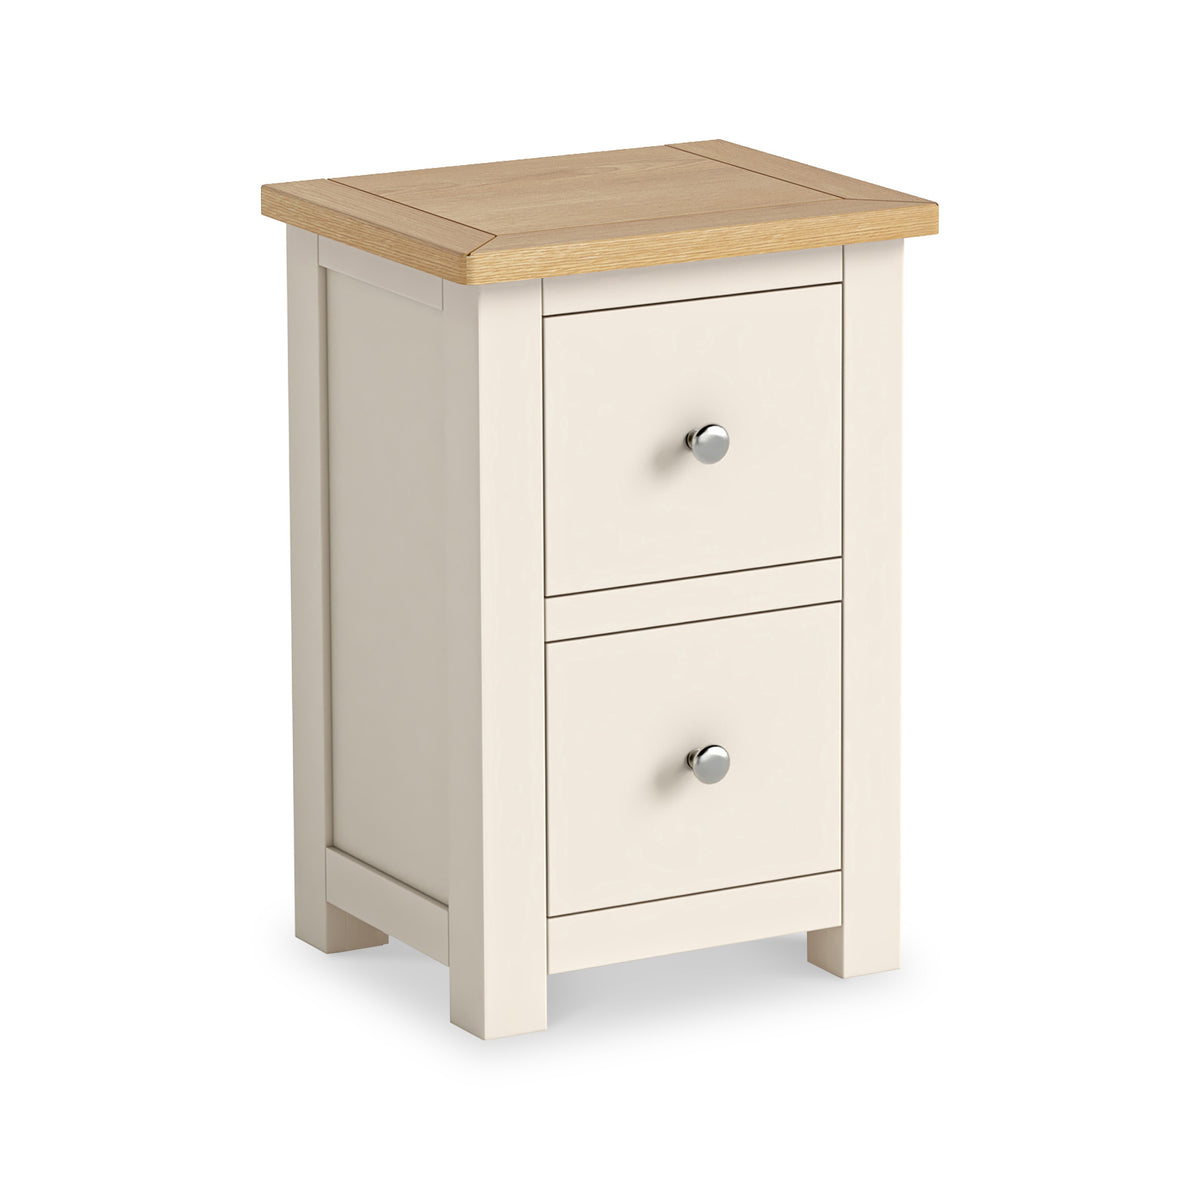 Duchy Linen Cream 2 Drawer Bedside Table with Oak Top from Roseland Furniture